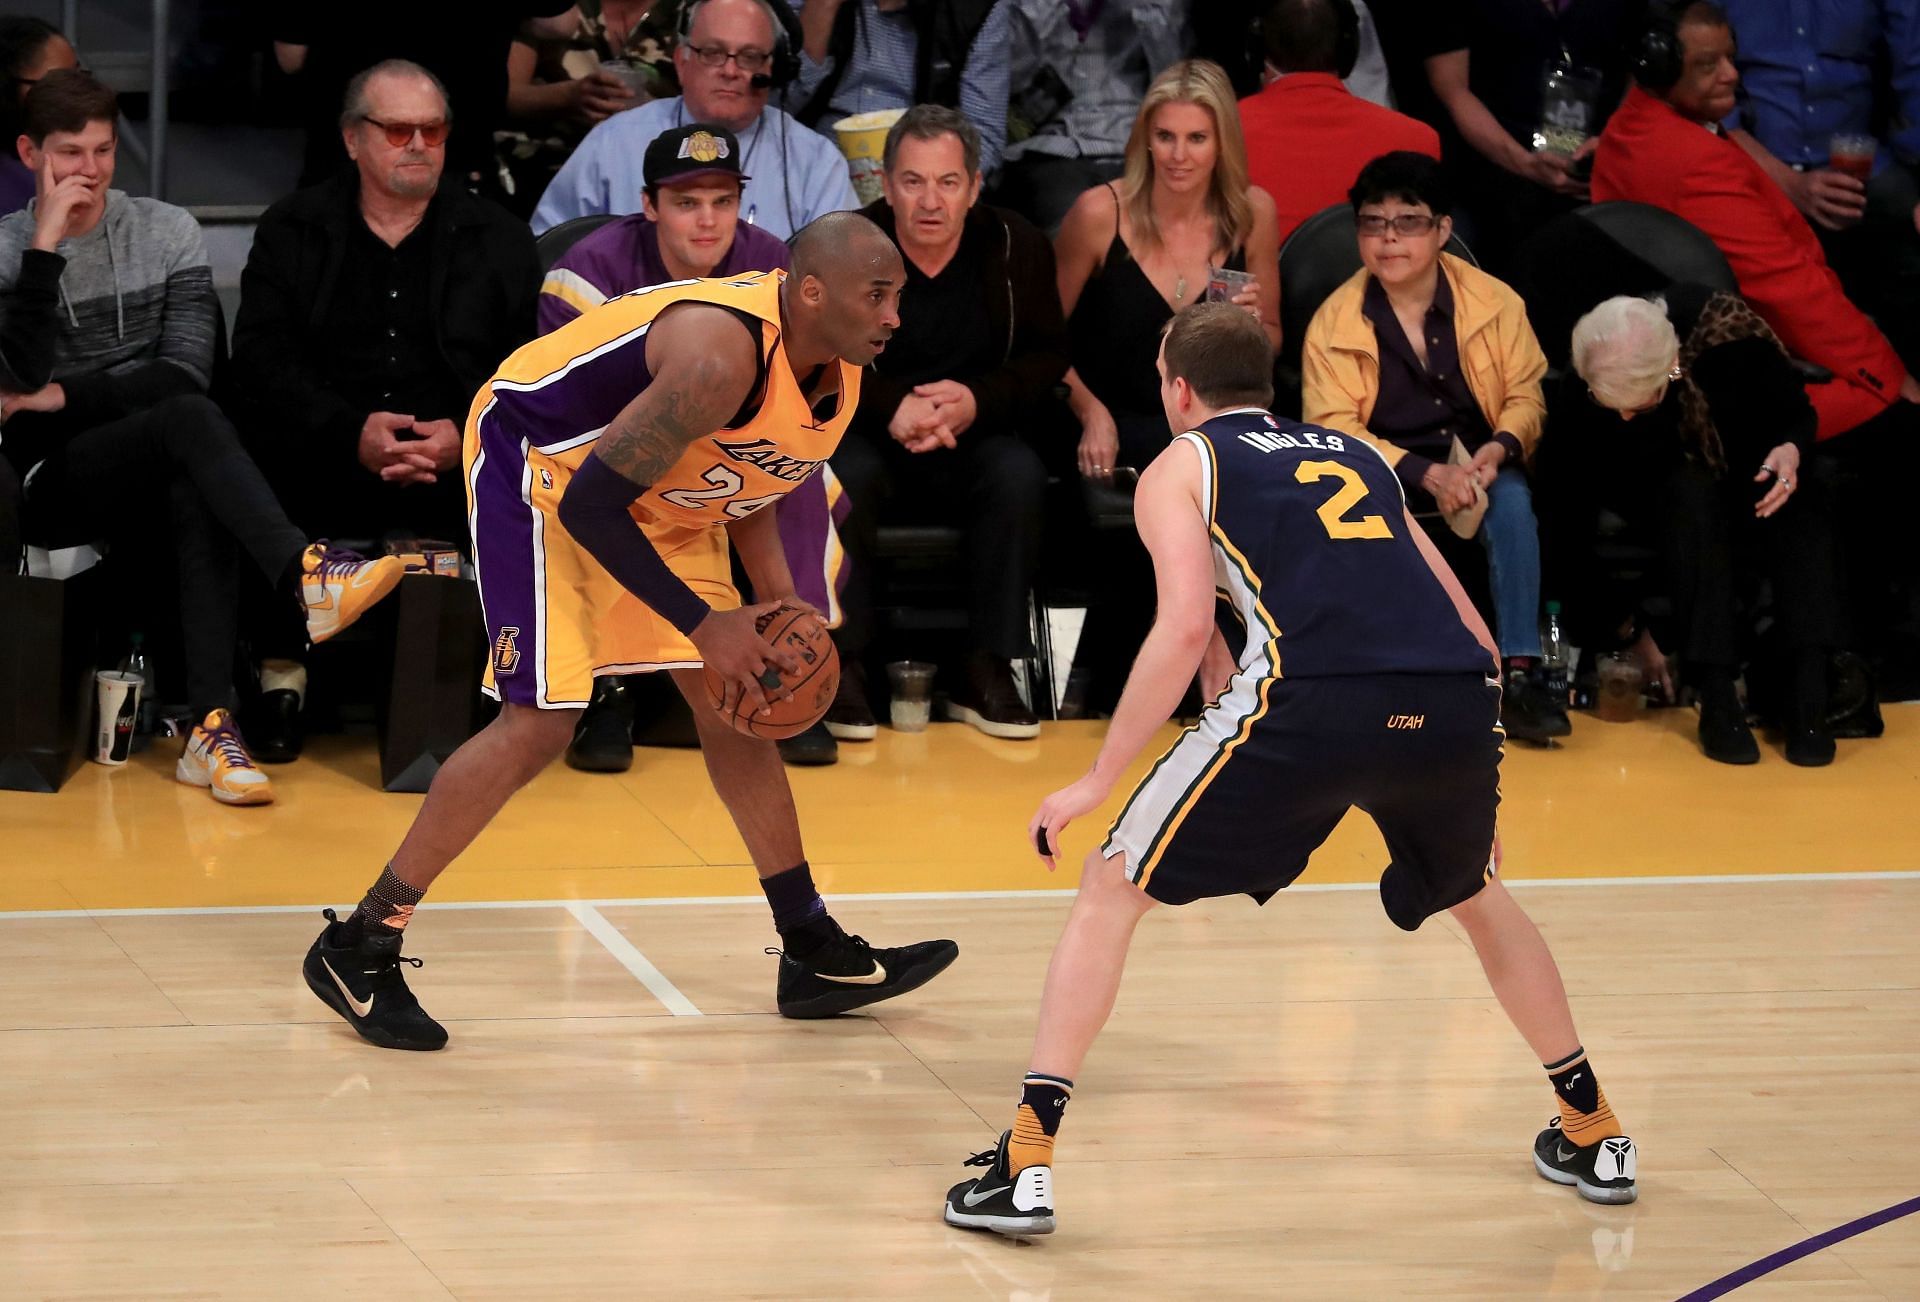 Los Angeles Lakers Kobe Bryant with the ball in his final game